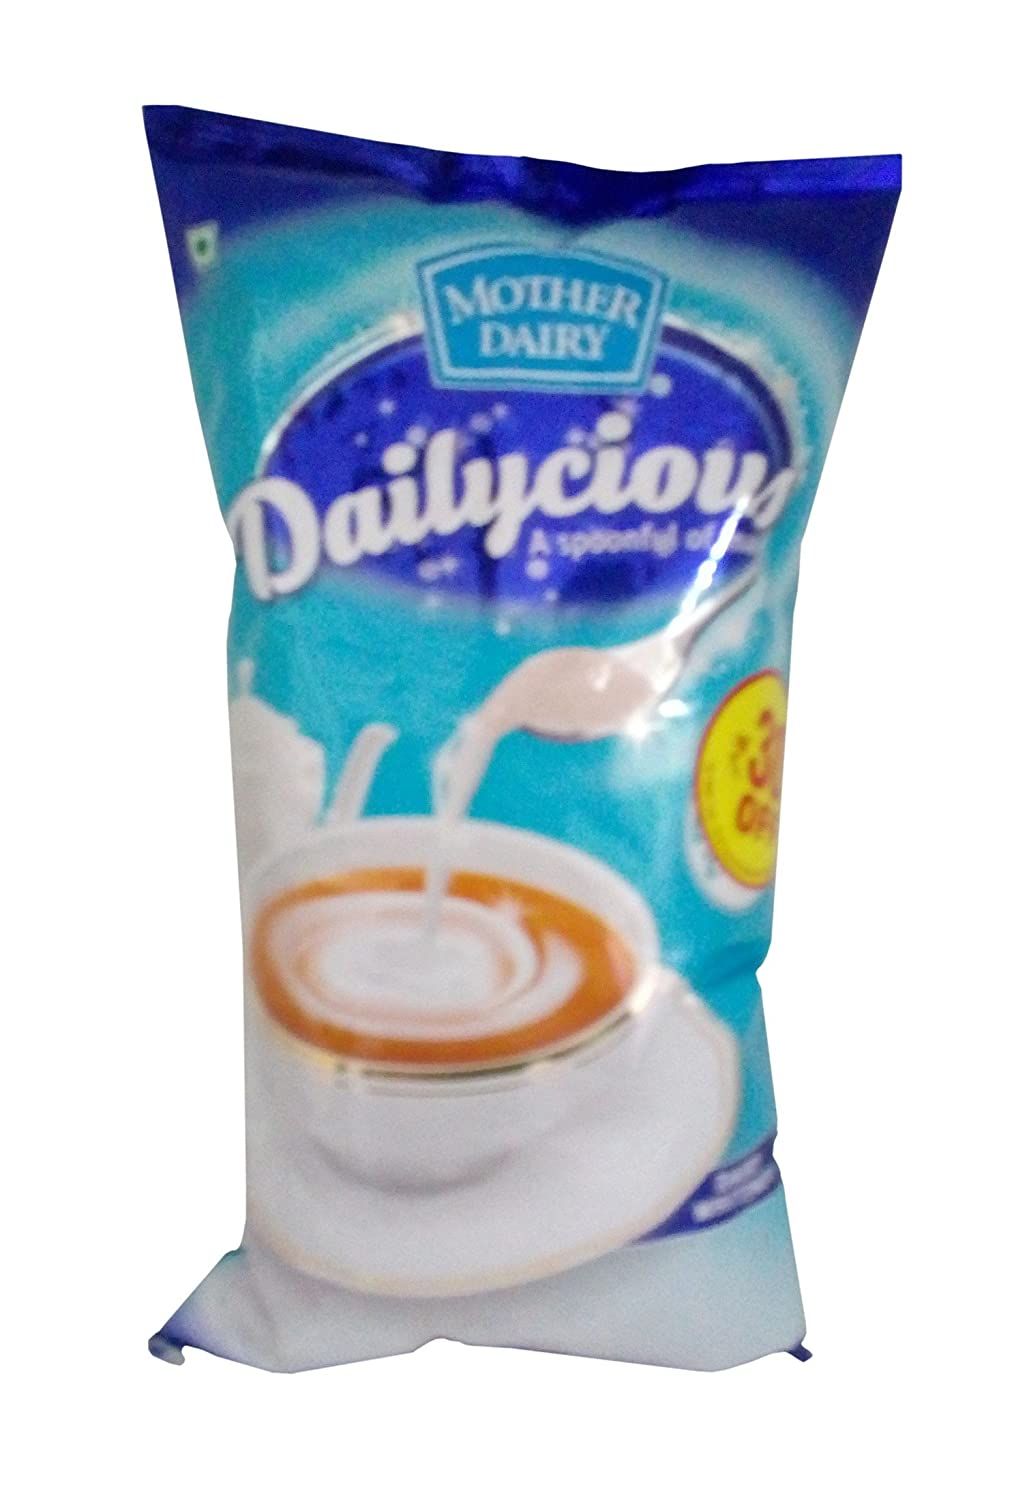 Mother Dairy Whitener Image